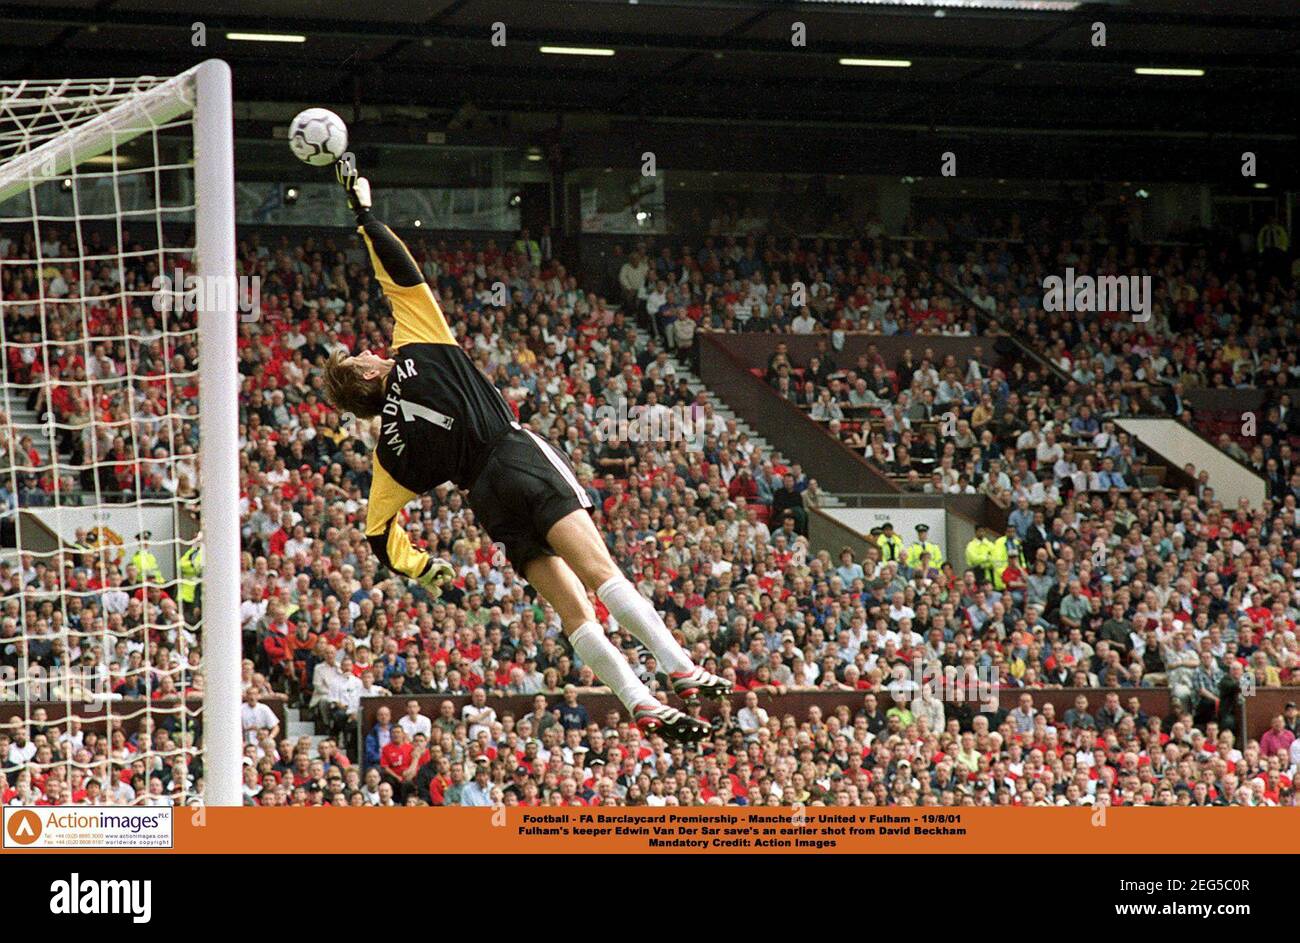 Football - FA Barclaycard Premiership - Manchester United v Fulham - 19/8/01  Fulham's keeper Edwin Van Der Sar save's an earlier shot from David Beckham  Mandatory Credit: Action Images Stock Photo